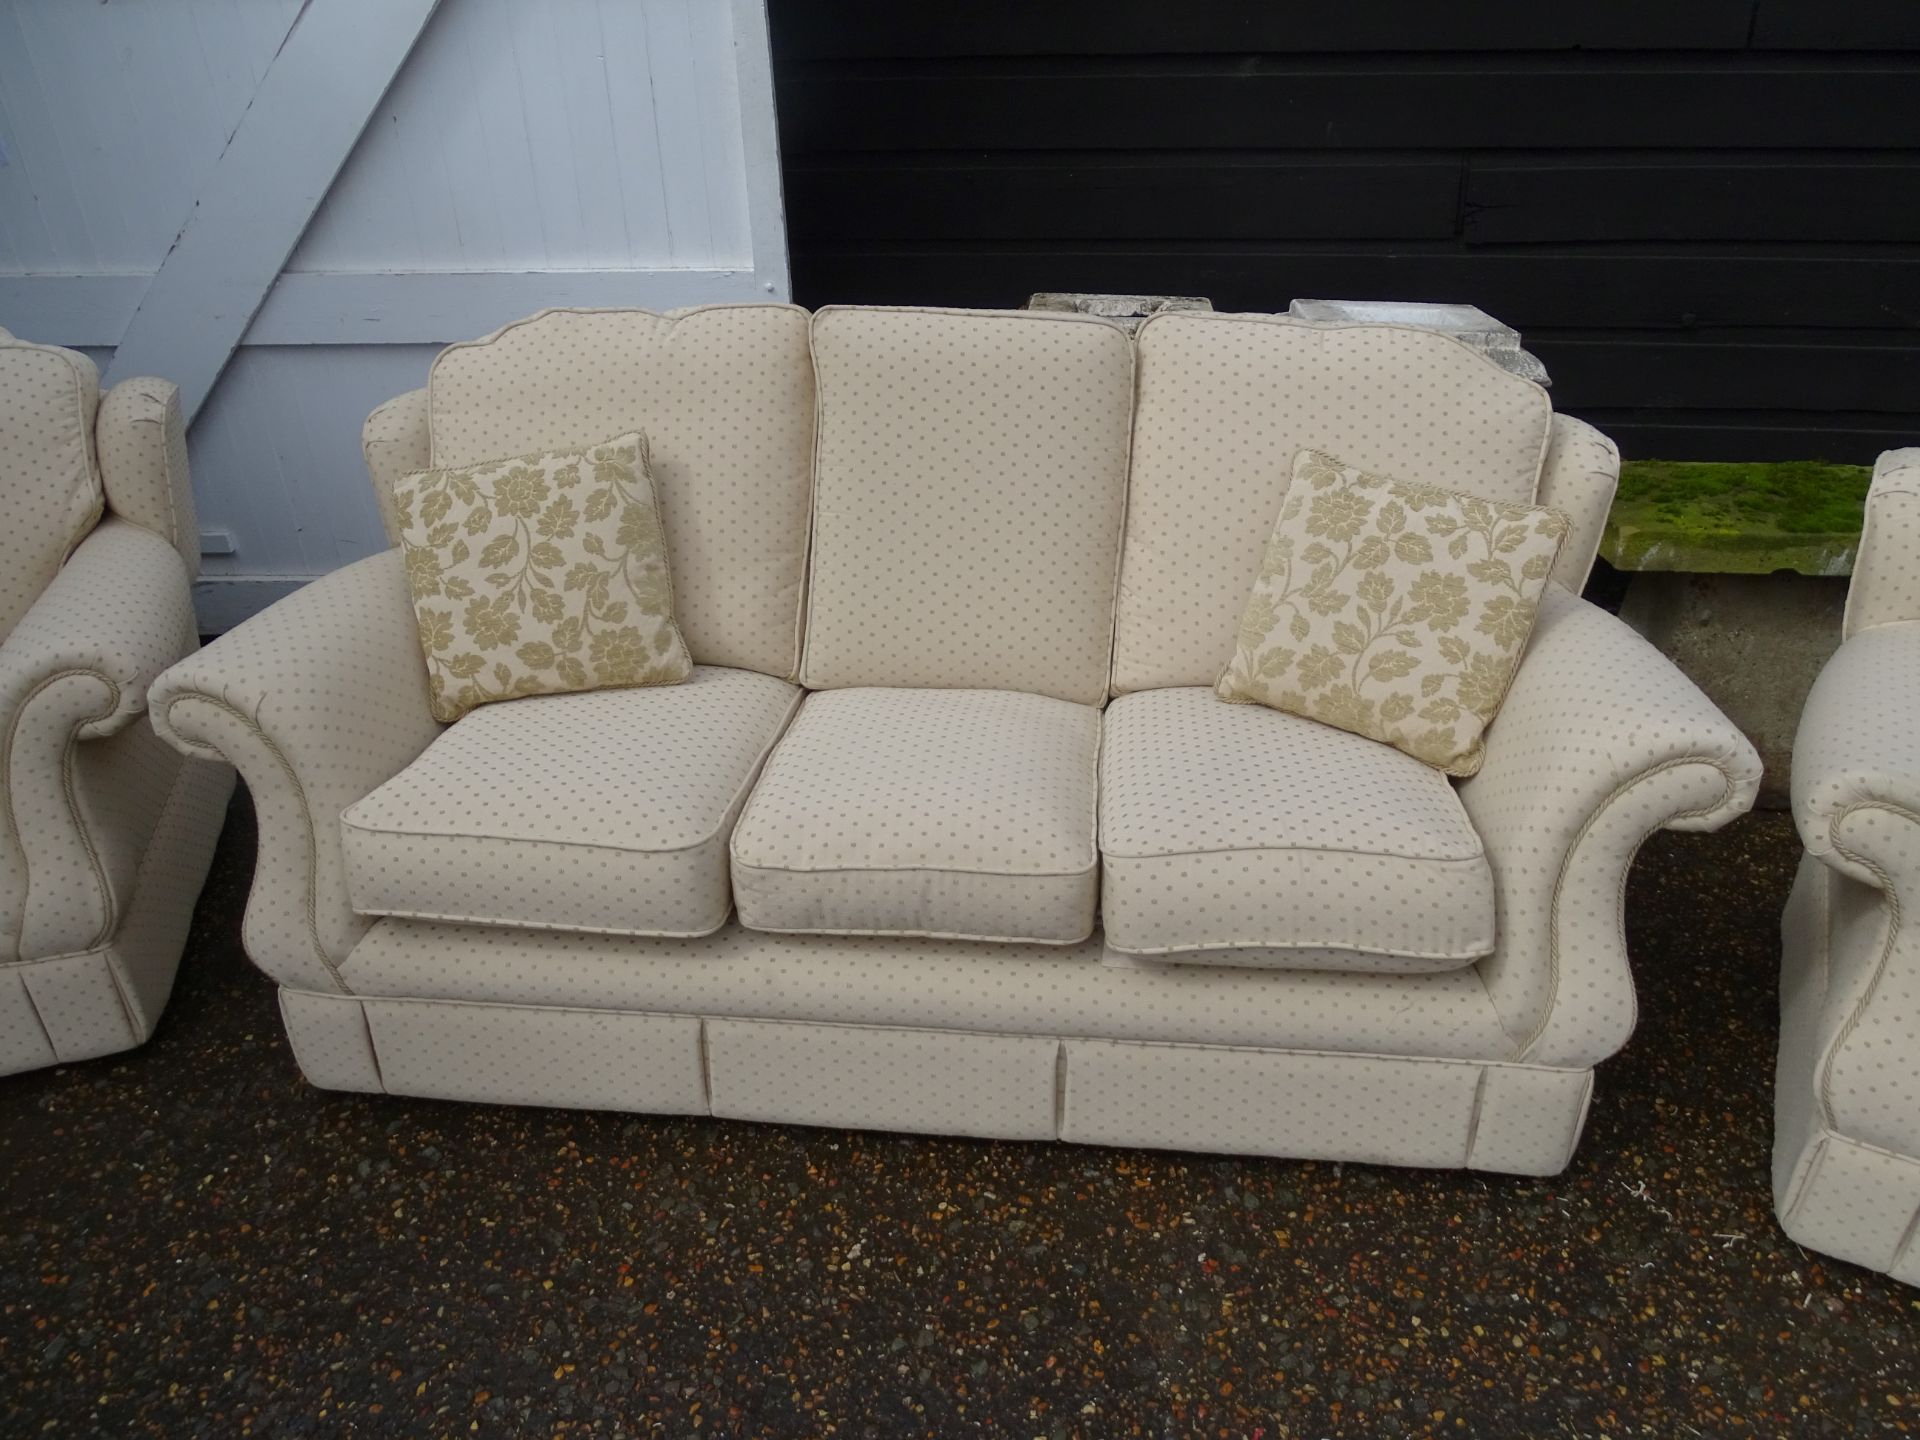 3 Seater sofa and 2 armchairs  in good. very clean condition - Image 3 of 4